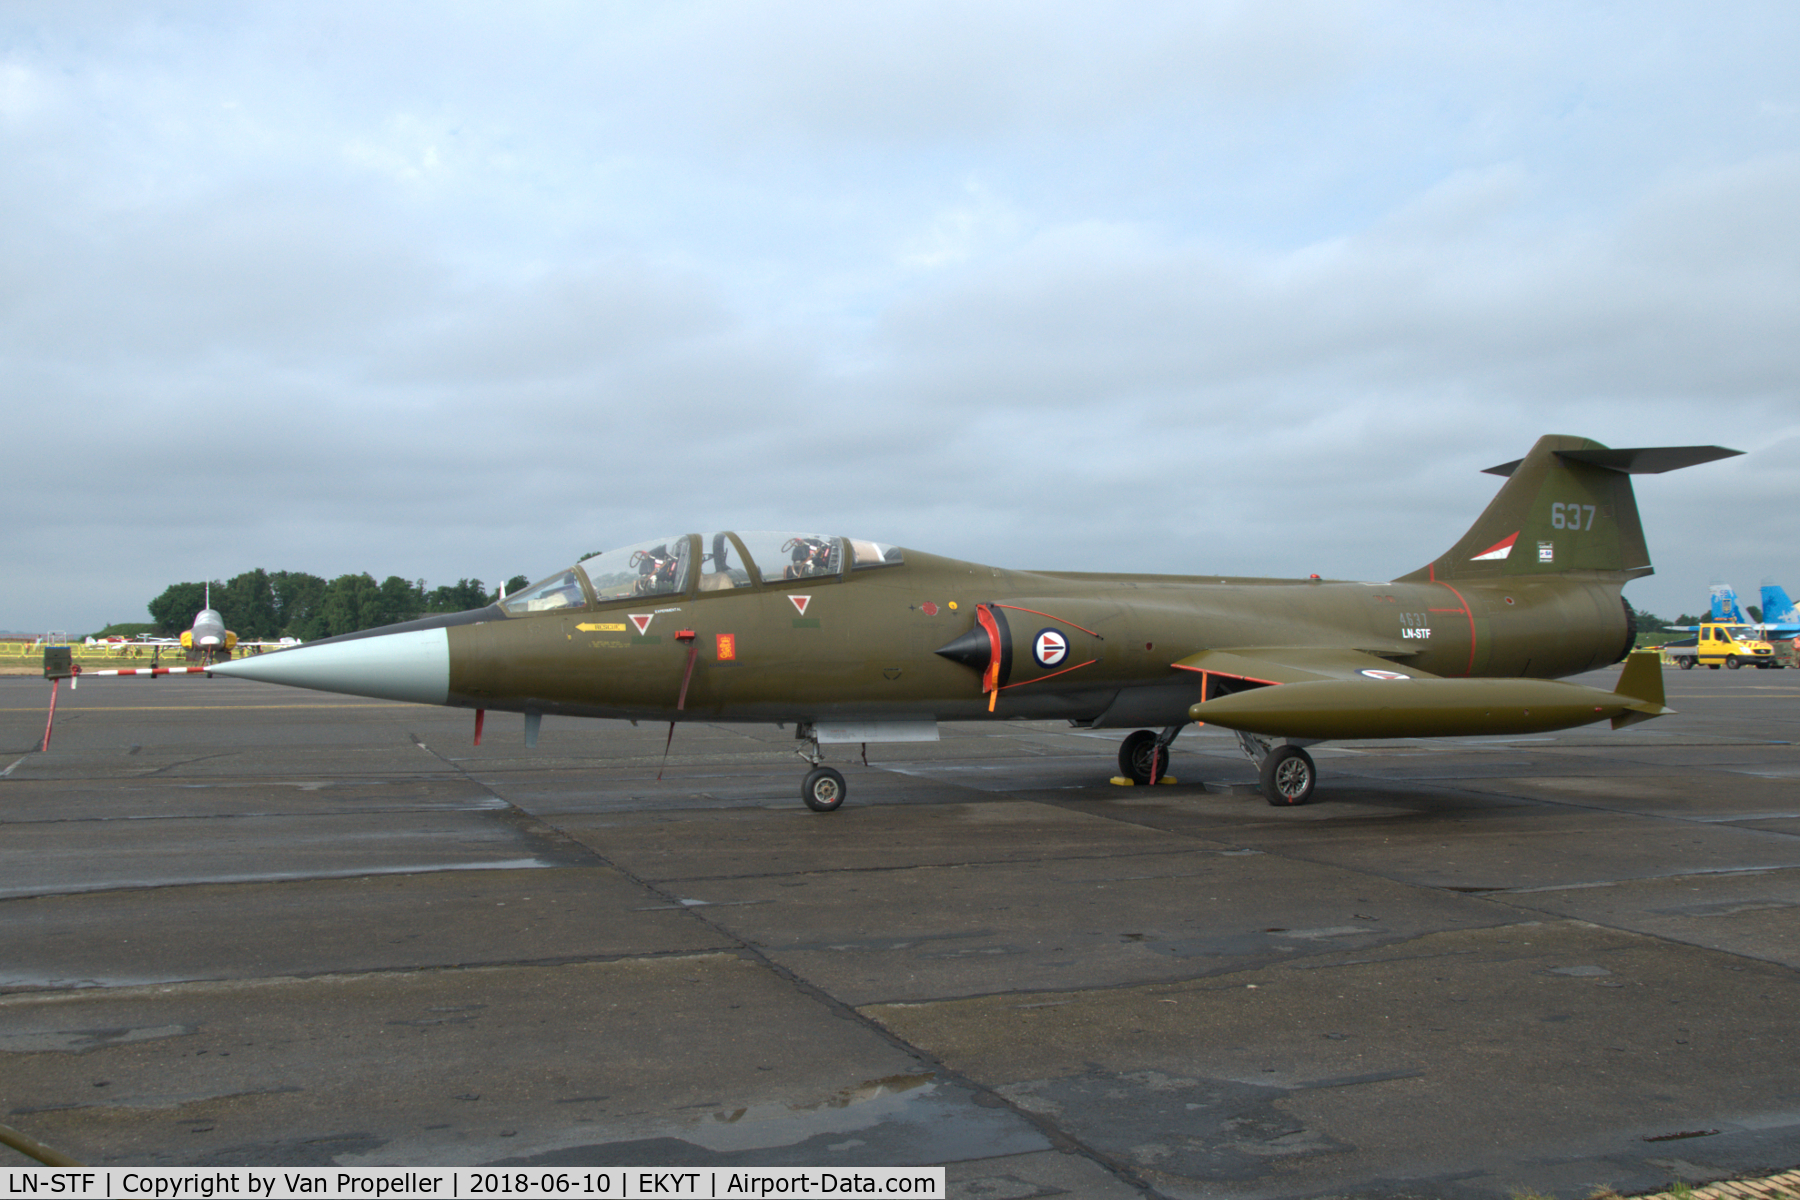 LN-STF, Lockheed CF-104D Starfighter C/N 583A-5307, Lockheed CF-104D Starfighter of the Norwegian Friends of the Starfighter at Aalborg air show 2018 in Denmark